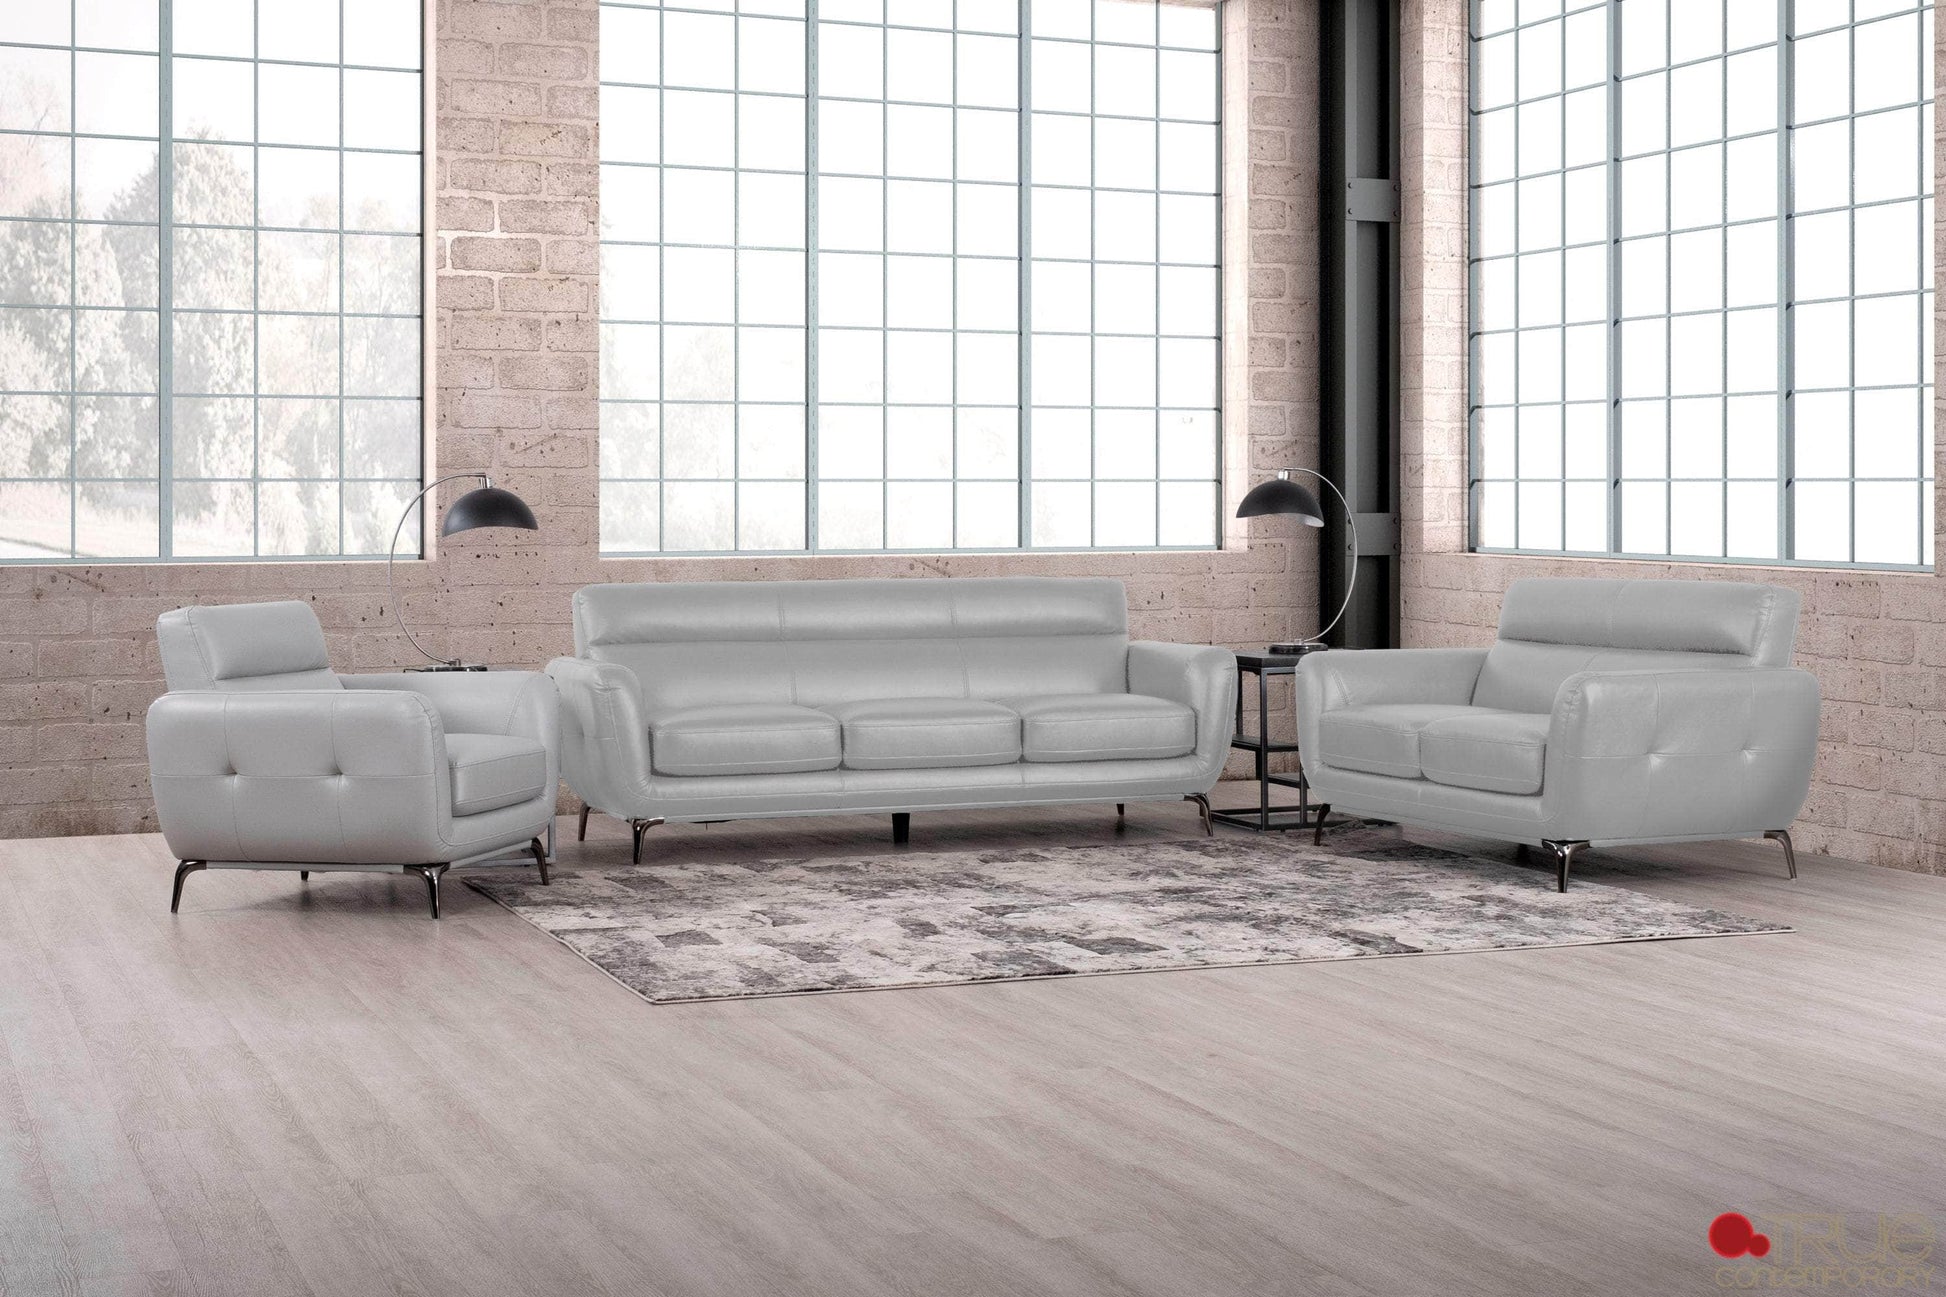 True Contemporary Sofa Set Grey William 3 Piece Tufted Faux Leather Sofa and Loveseat Set - Available in 2 Colours